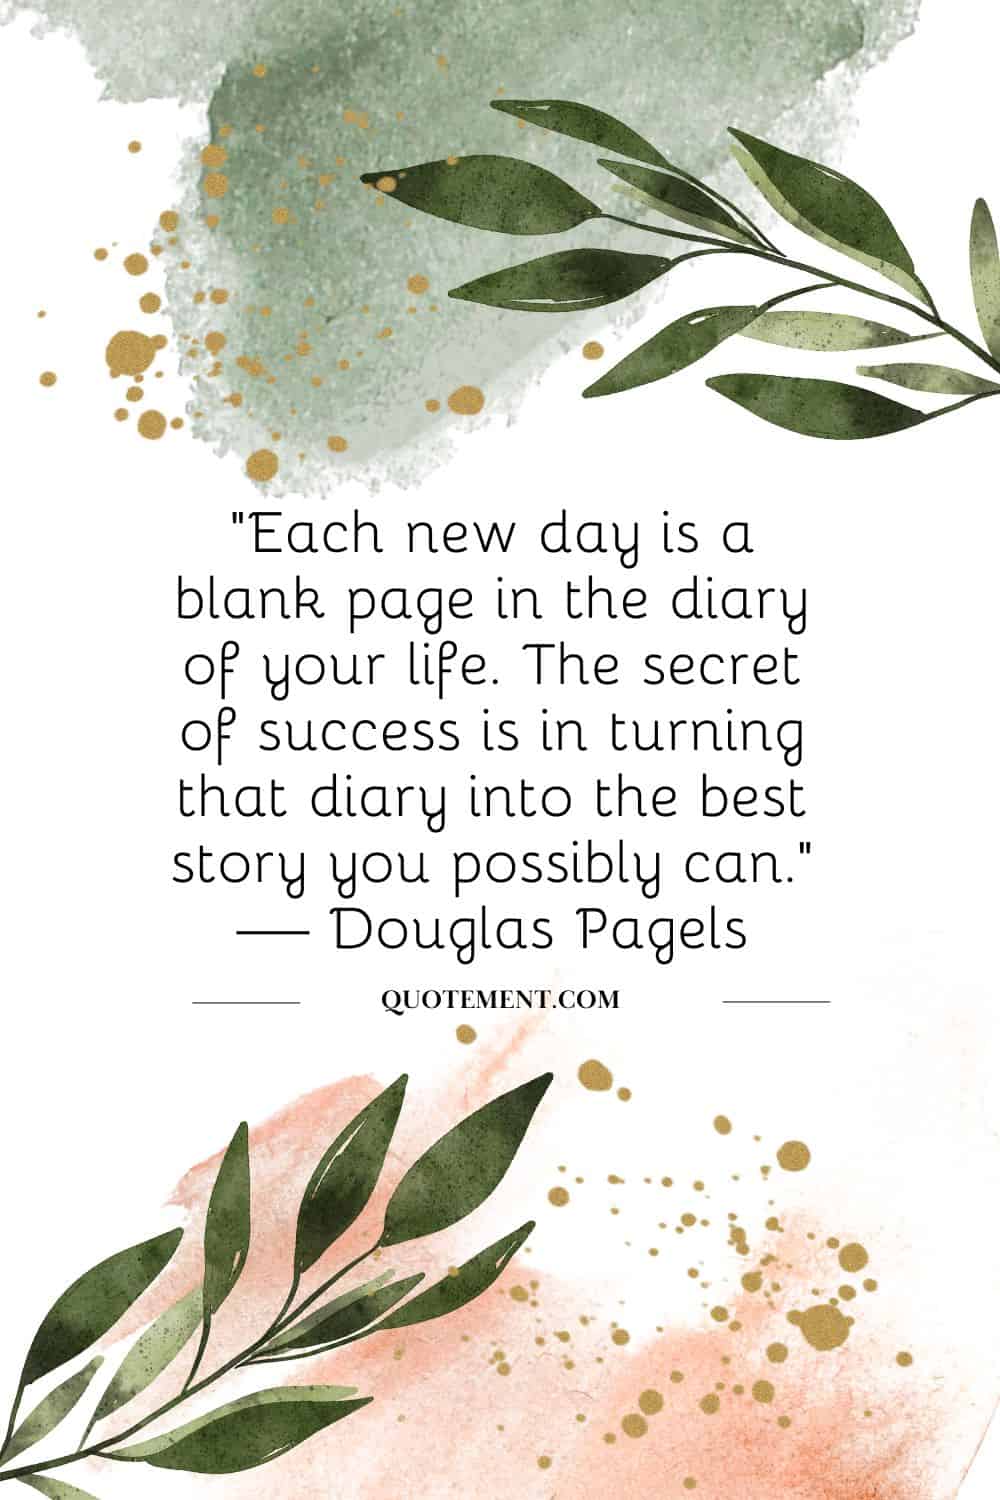 “Each new day is a blank page in the diary of your life. The secret of success is in turning that diary into the best story you possibly can.” — Douglas Pagels